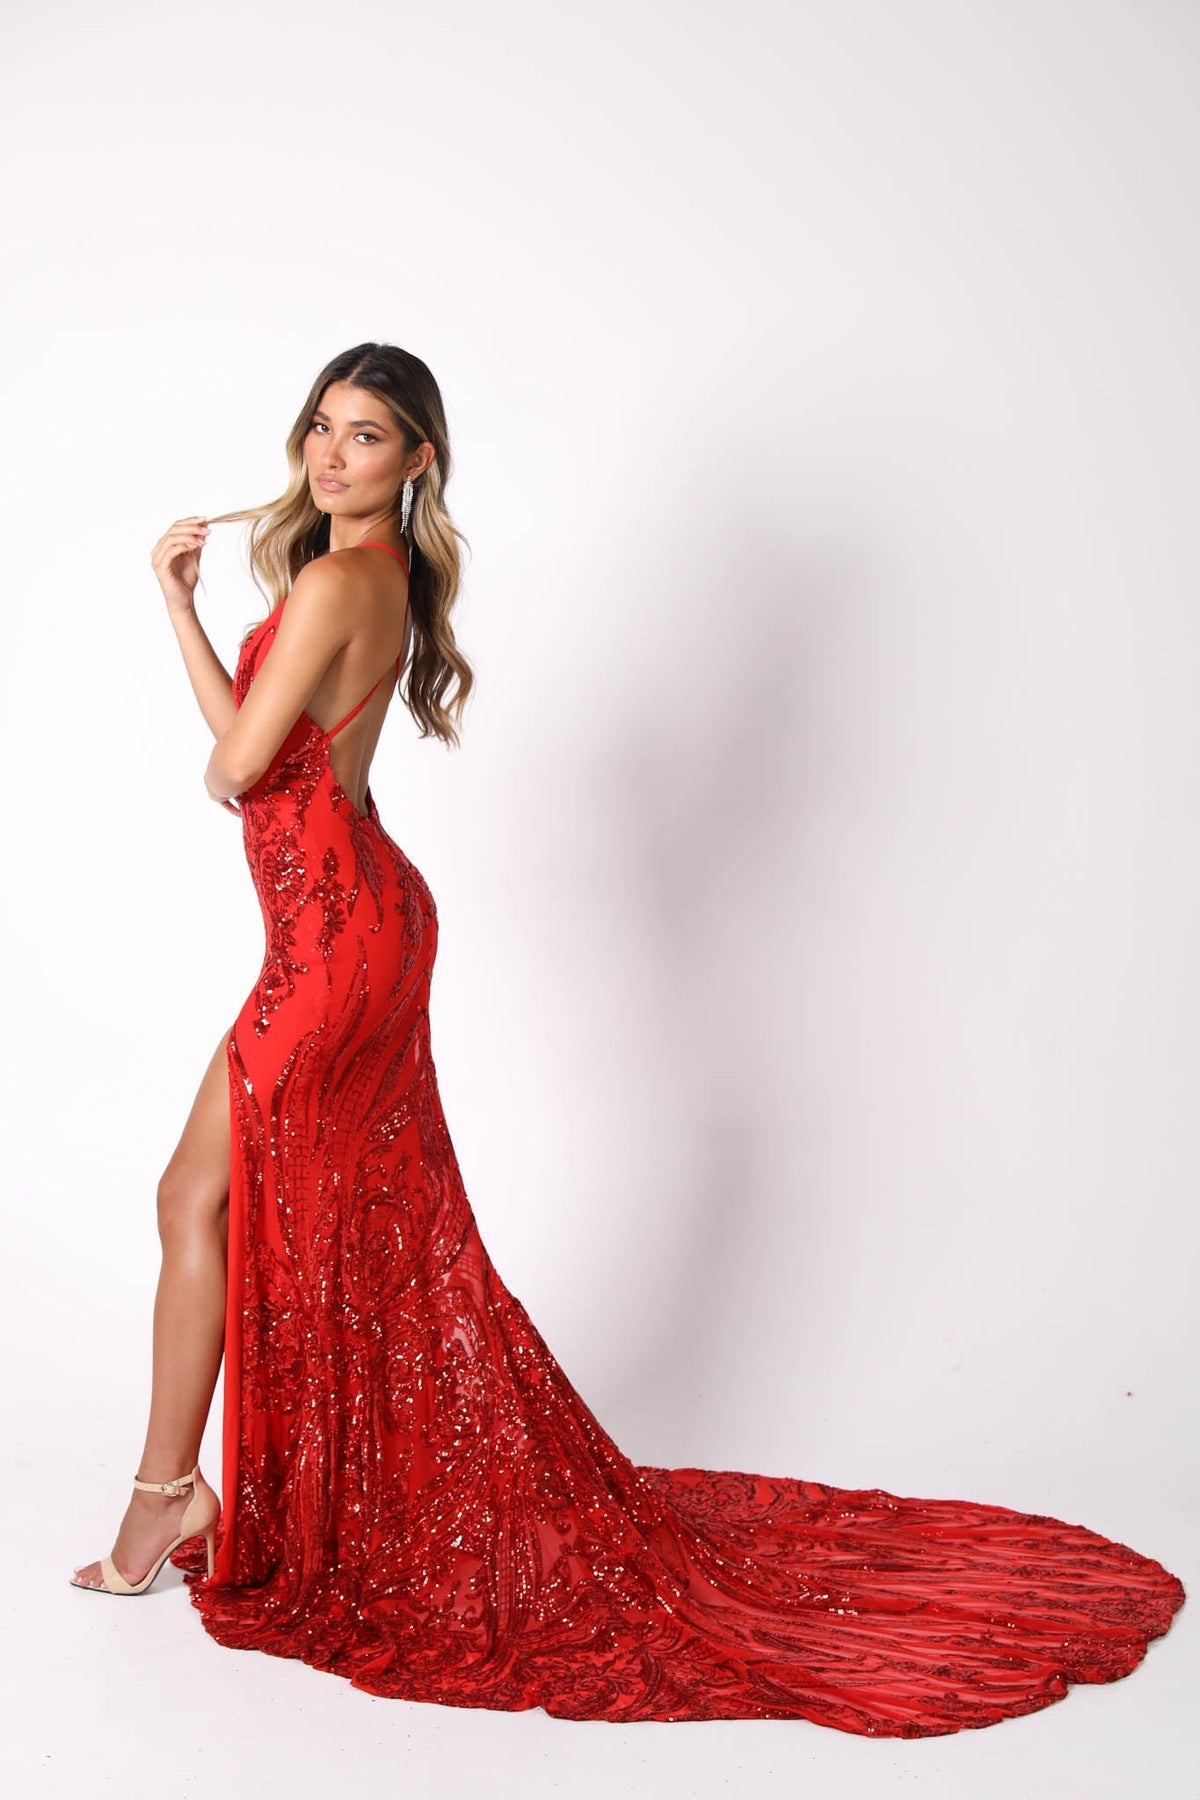 Side Sweep Train Image of Red Full Length Evening Sequin Gown with Deep Red Embroidered Pattern Sequins Over Red Underlay, V neckline, Criss-cross Straps on Open Back, Thigh-high Side Slit, Fit and Flare Silhouette